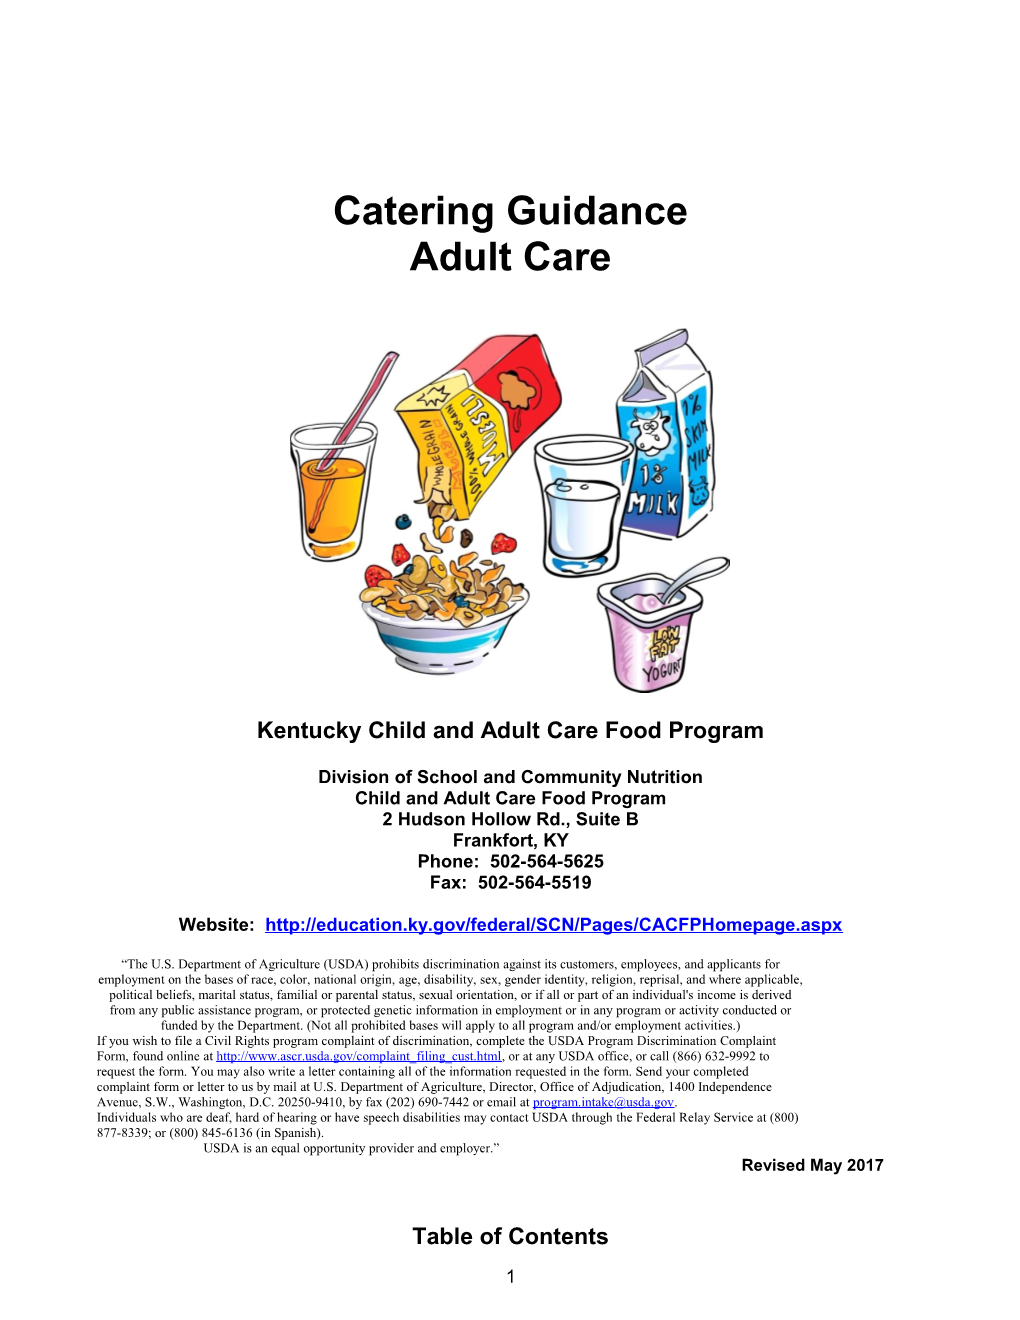 Kentucky Child and Adult Care Food Program